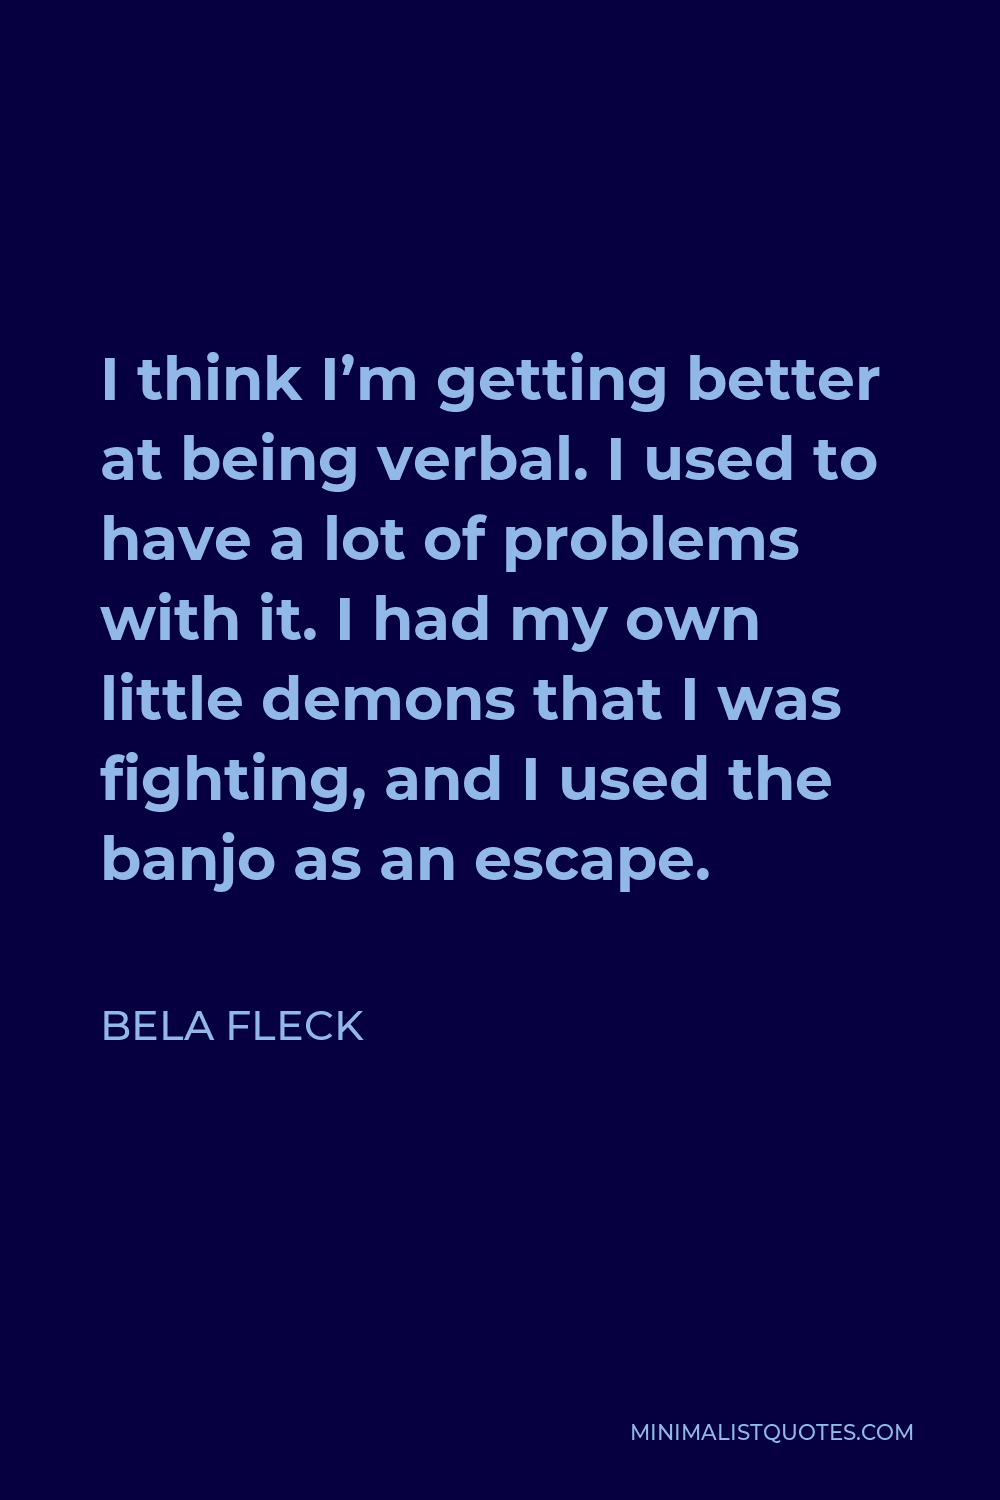 Bela Fleck Quote - I think I’m getting better at being verbal. I used to have a lot of problems with it. I had my own little demons that I was fighting, and I used the banjo as an escape.